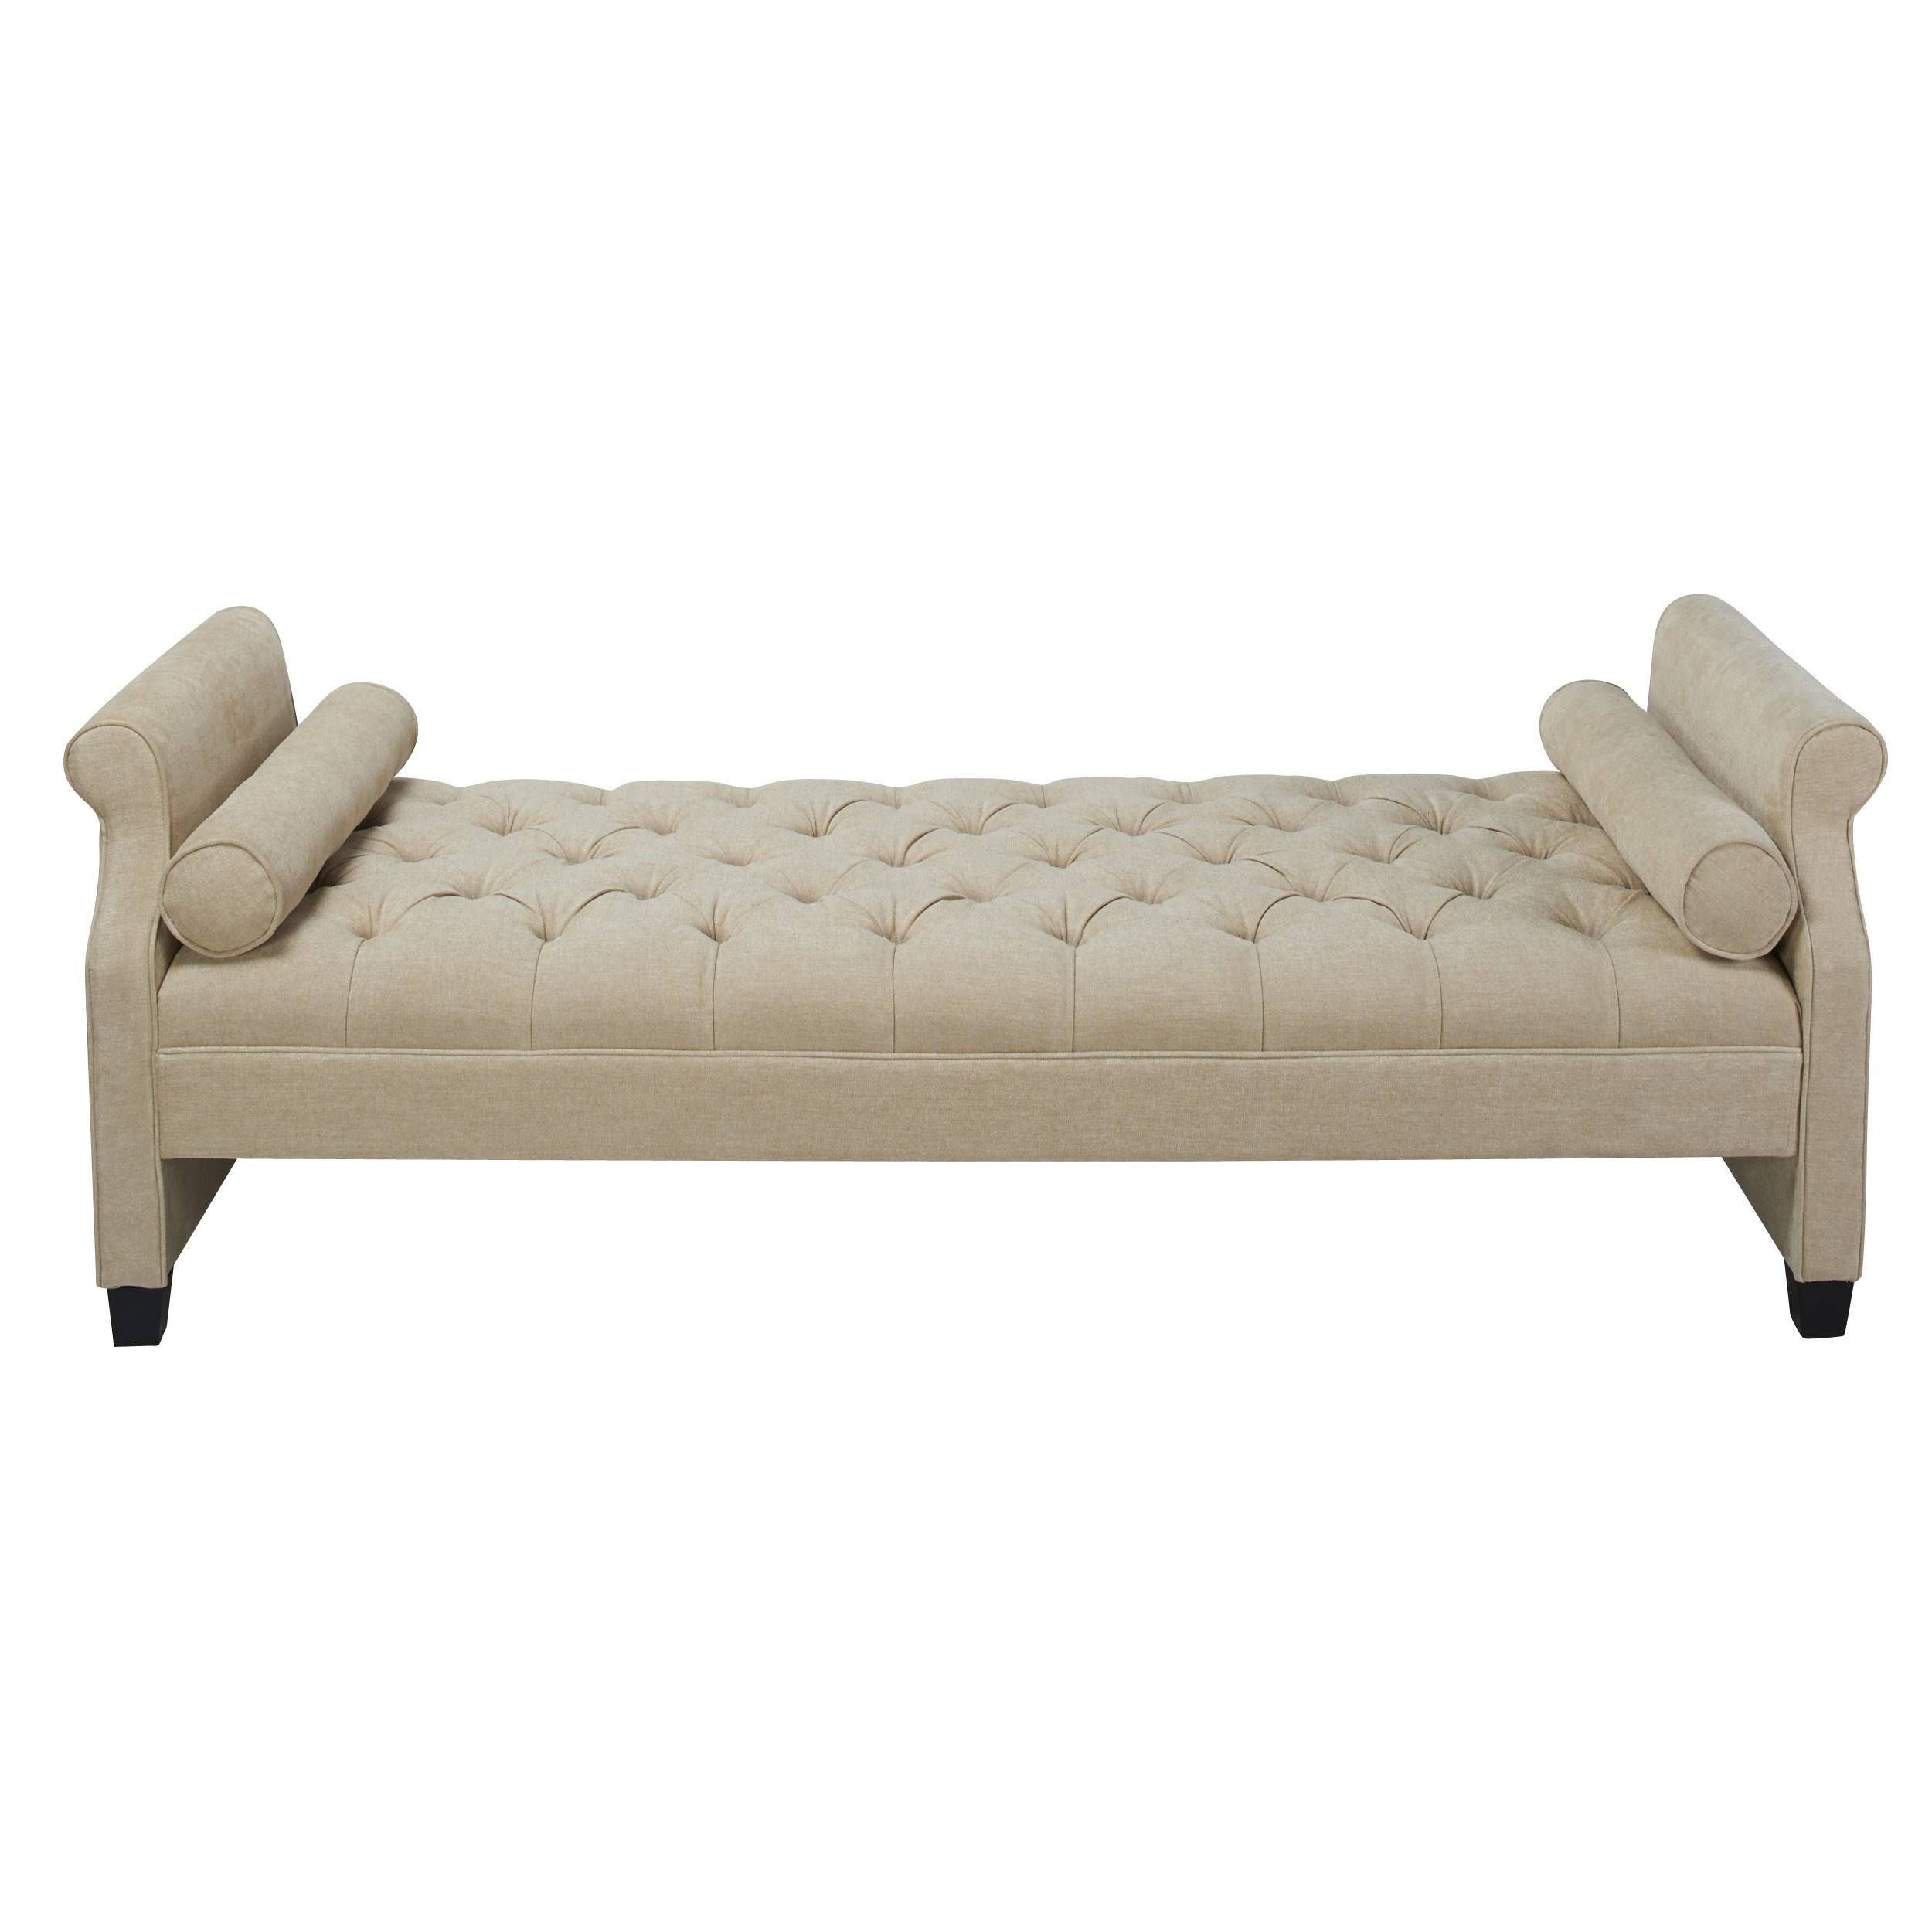 Furniture Home : Jennifer Taylor Eliza Upholstered Bedroom Bench Pertaining To Bedroom Bench Sofas (View 9 of 15)